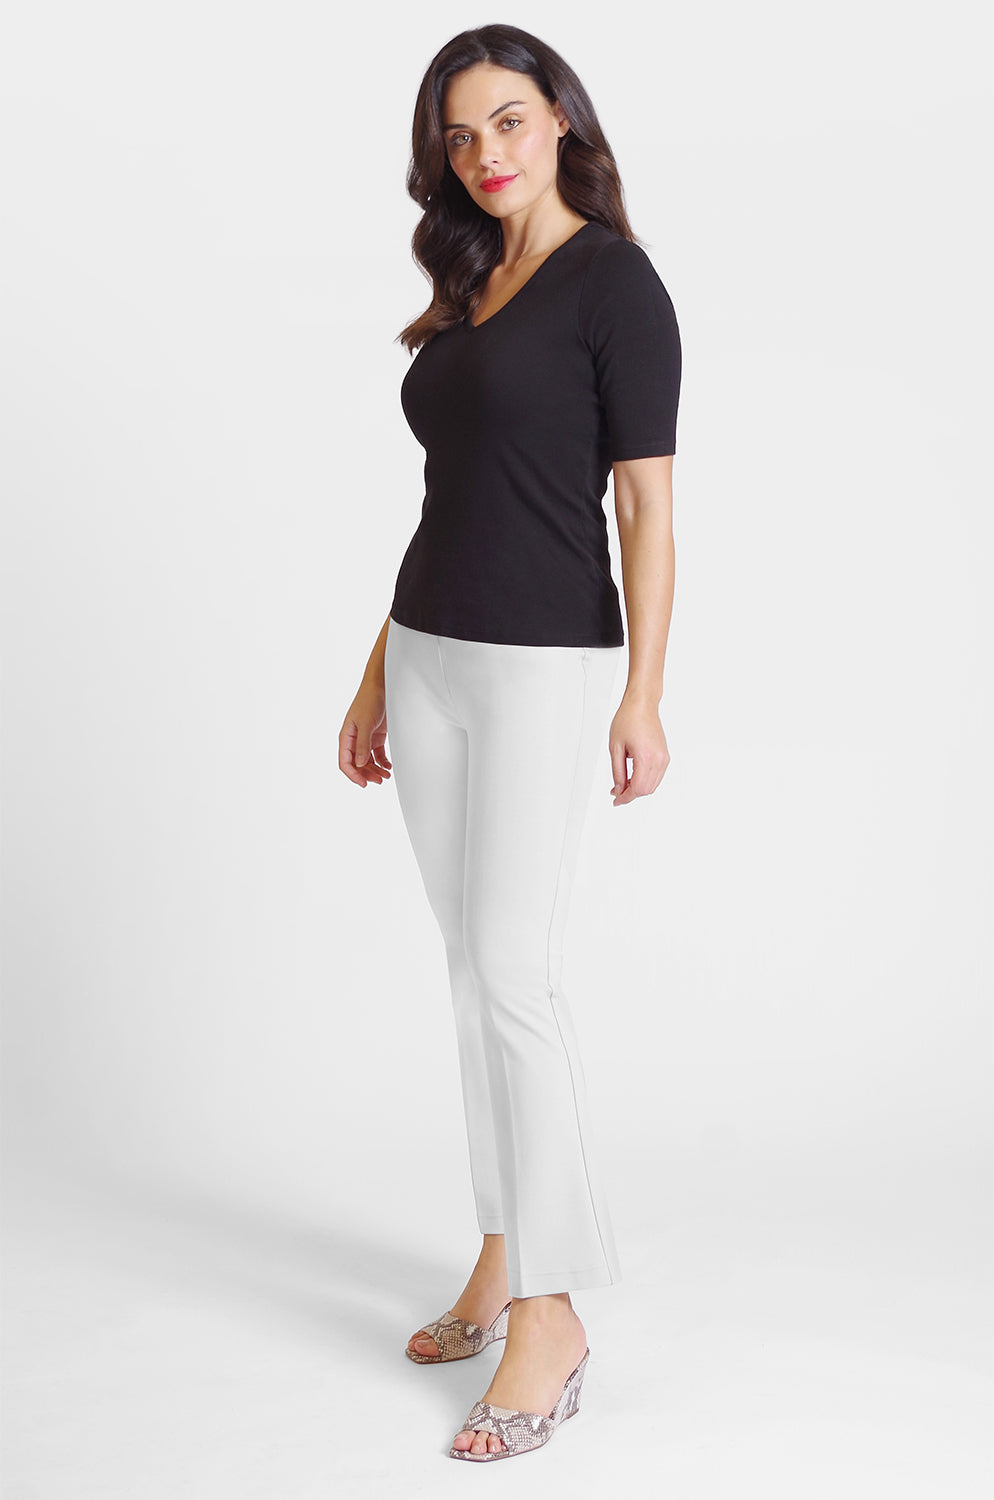 Cher Flare Pant - Paramount Knit: FINAL SALE